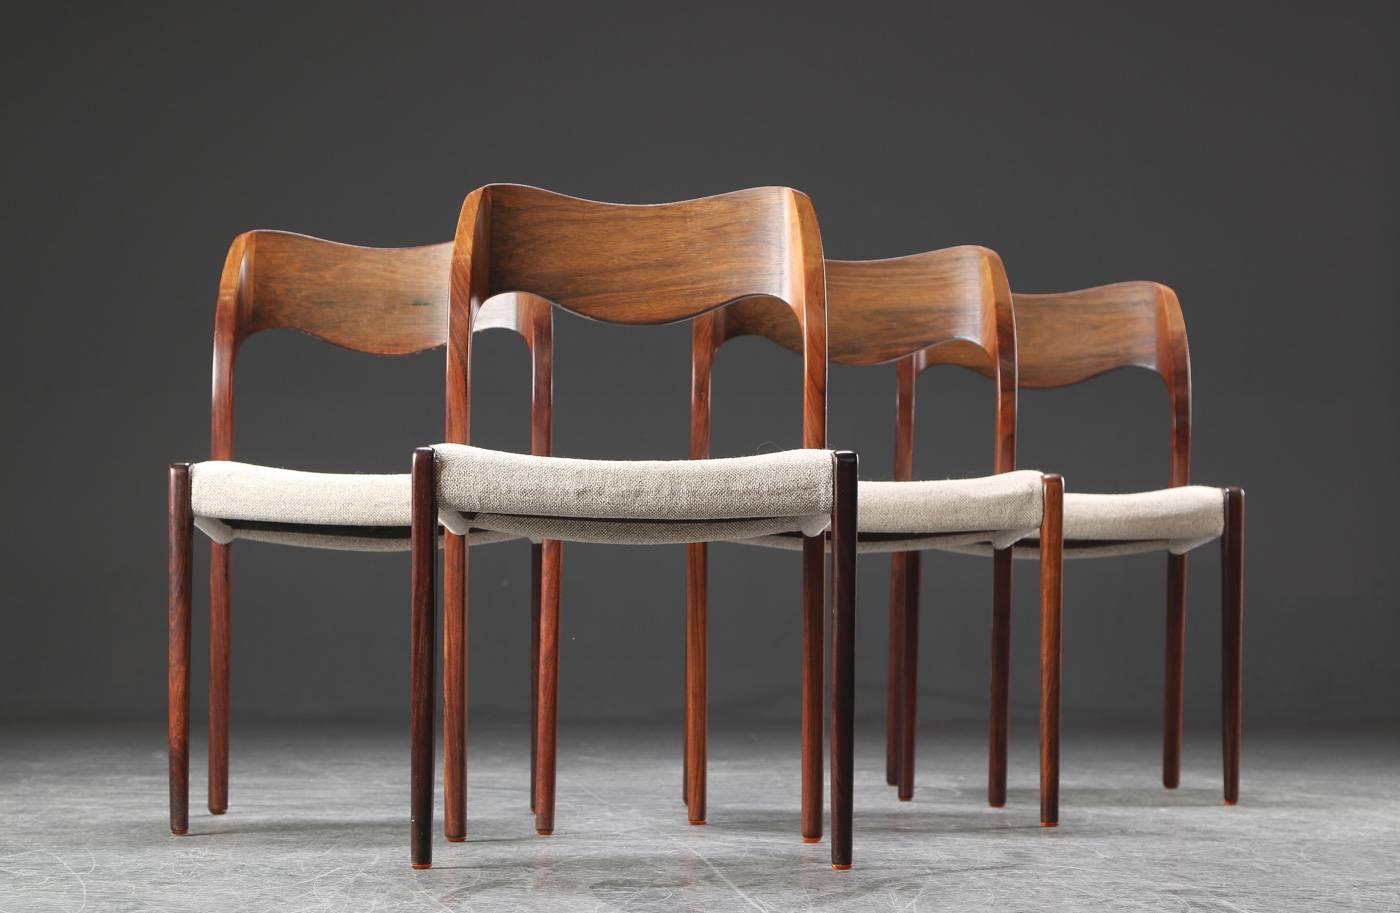 Dining chairs, designed 1951 by Niels Otto Møller and produced by J. L. Møller Møbelfabrik, model number 71.
Original condition, restoration or request possible.